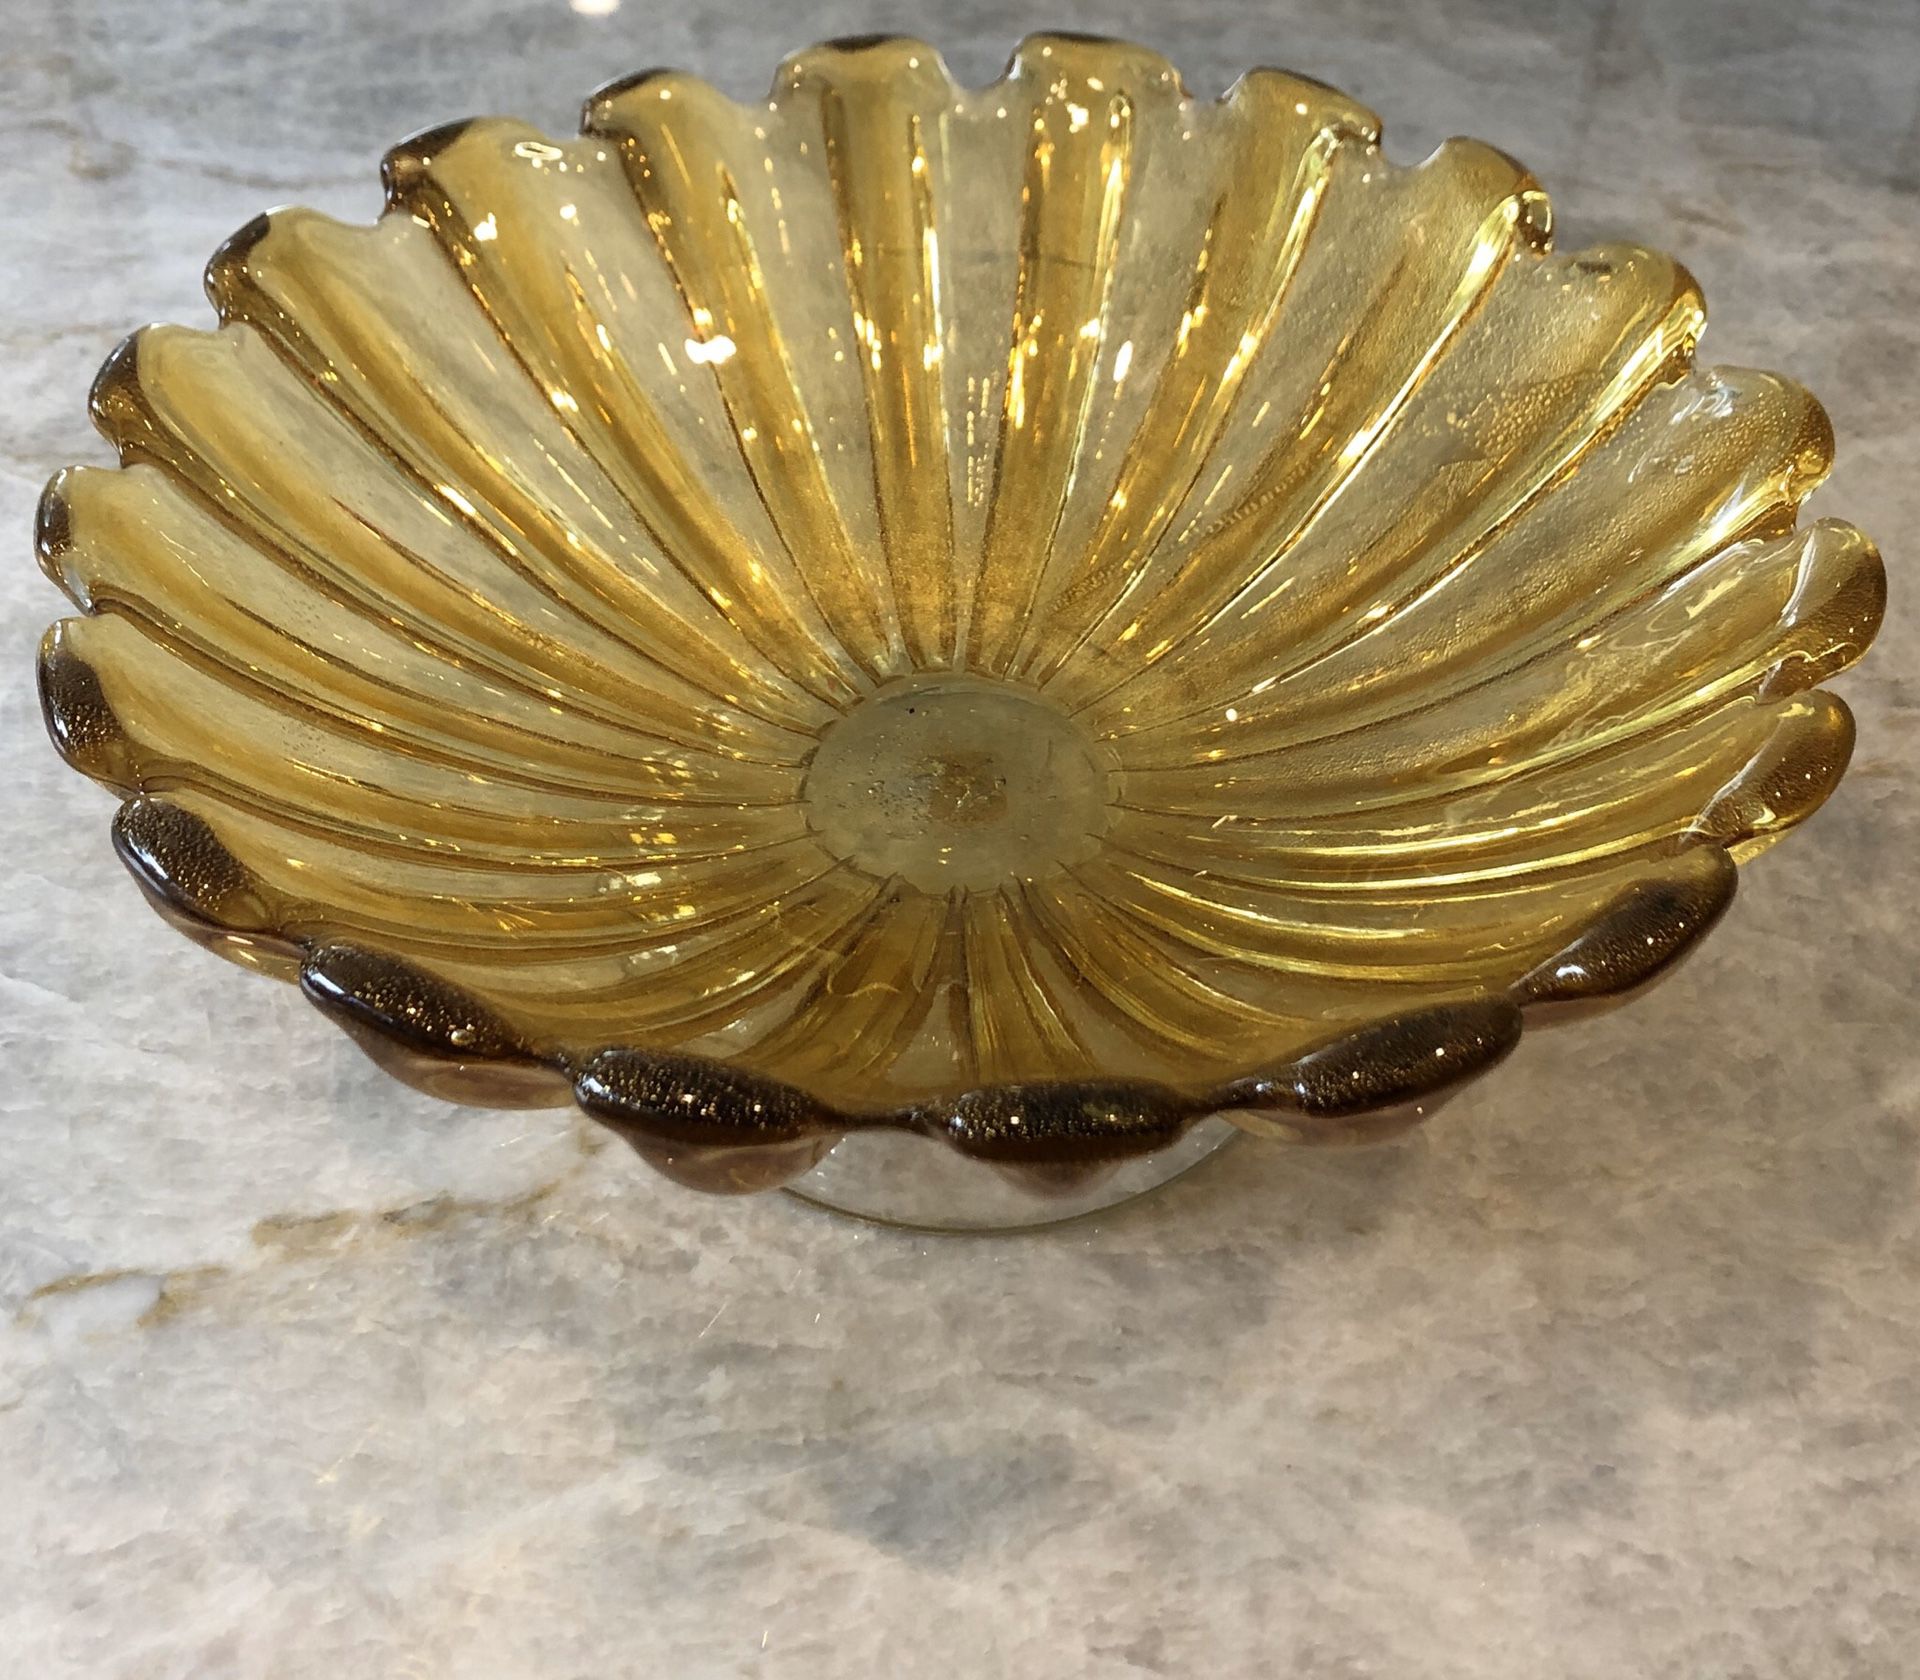 Murano Glass Bowl Made In Italy 12 1/2” D x 6 1/2” H, Golden Amber